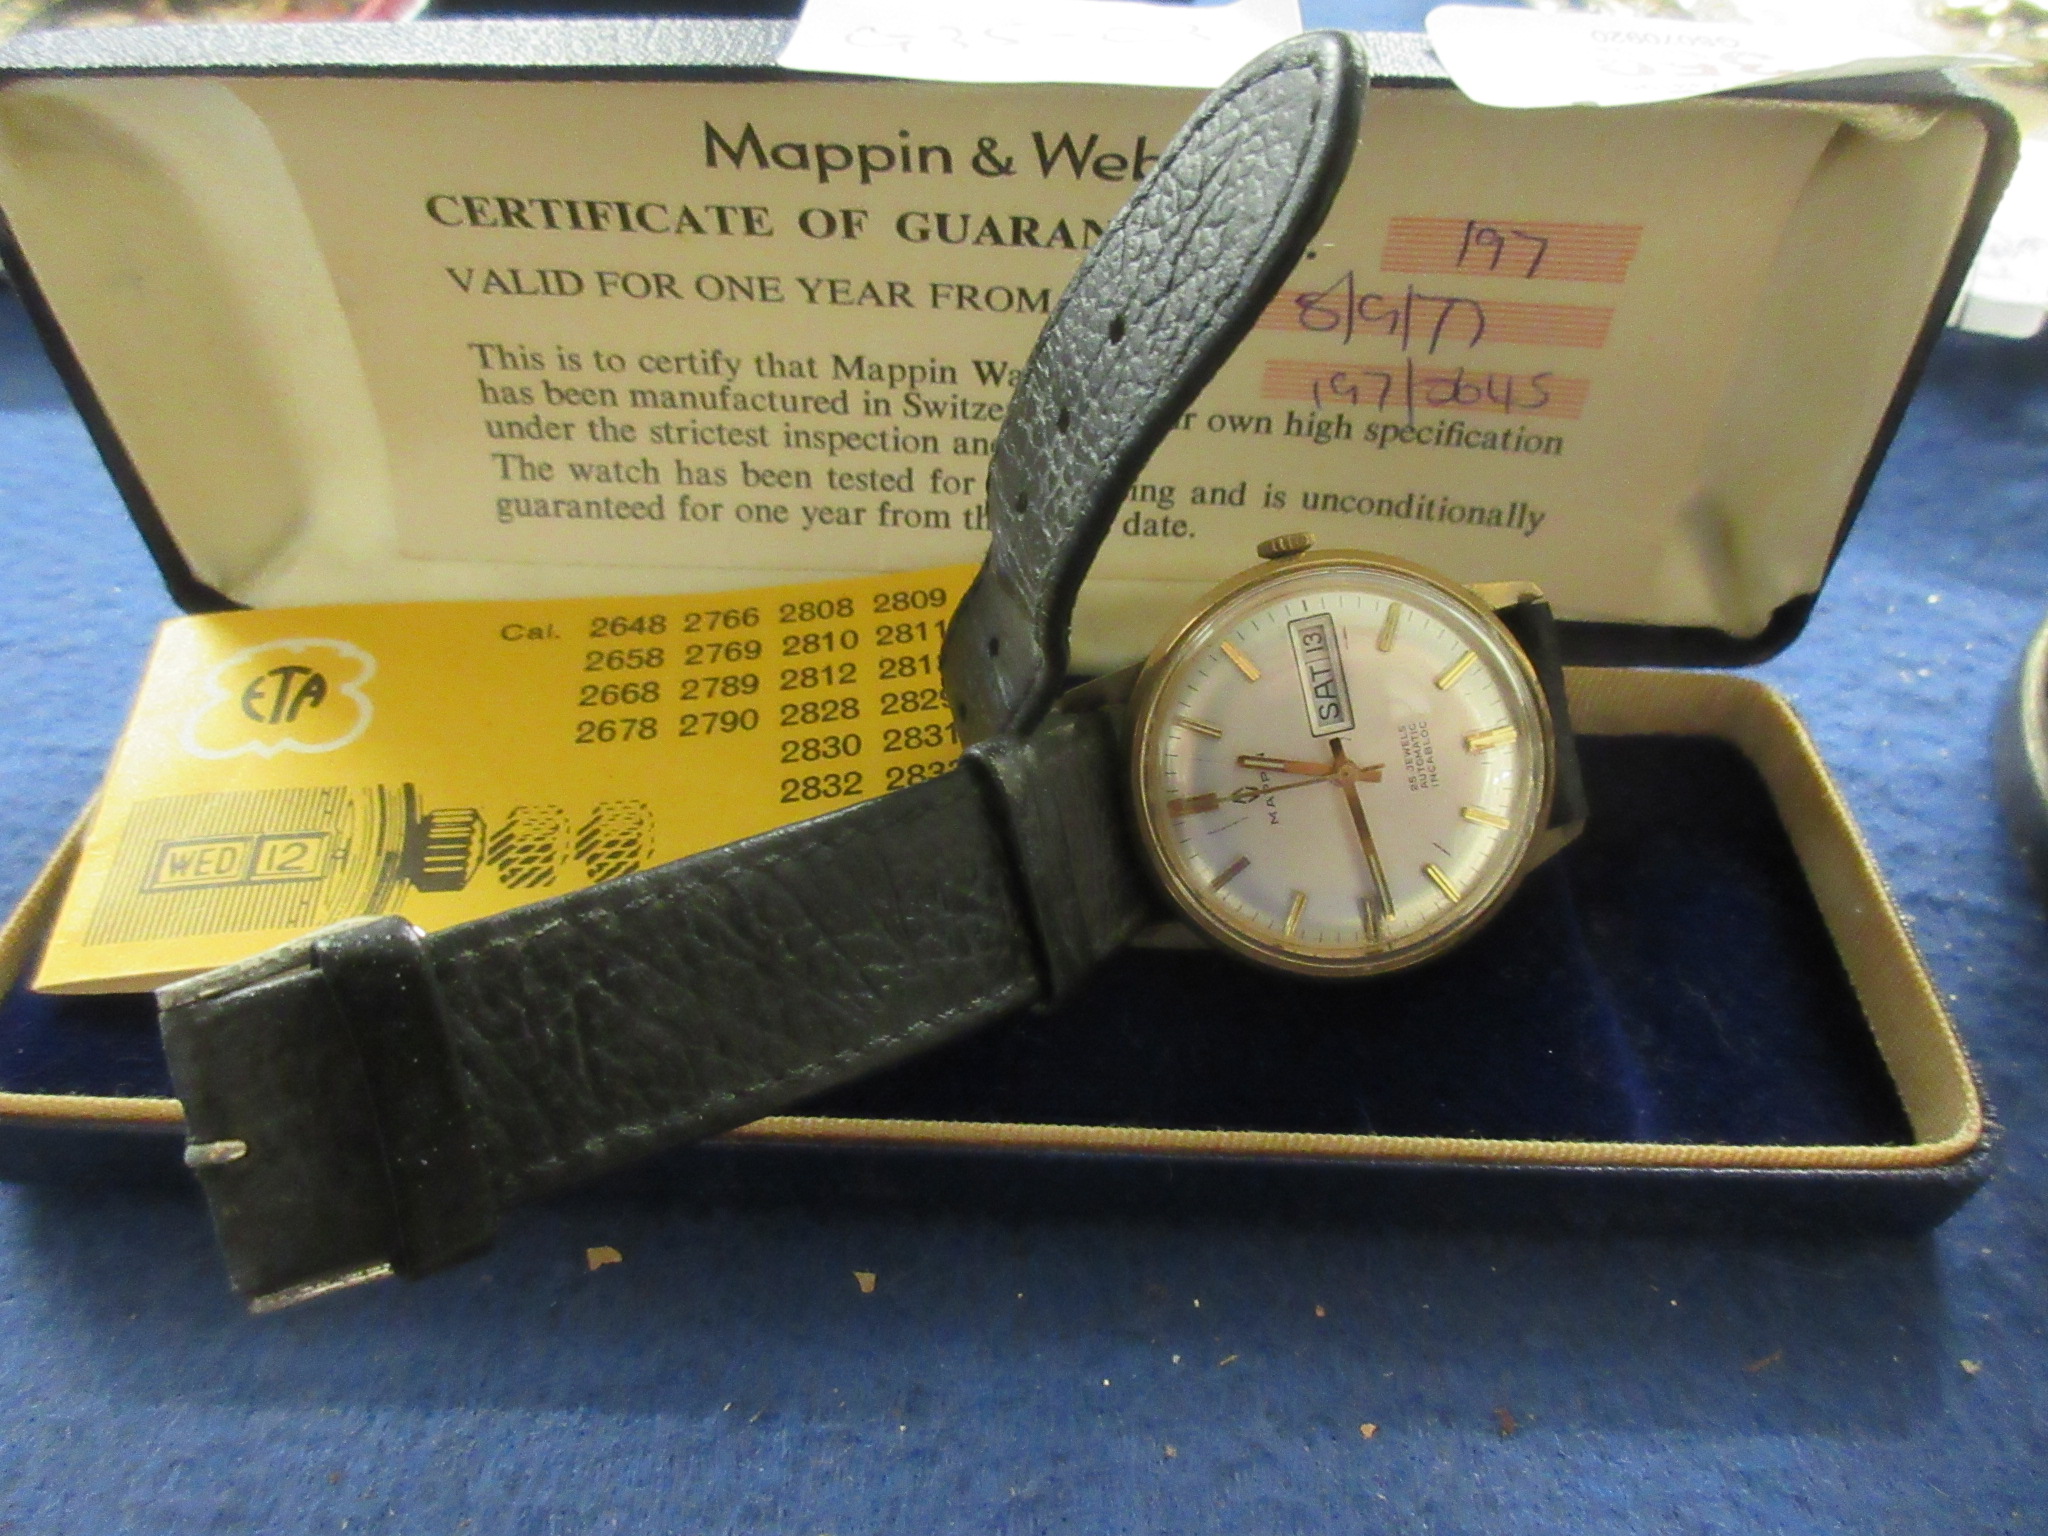 MAPPIN & WEBB EARLY 1970S GENTS WRIST WATCH IN ORIGINAL CASE, COMPLETE WITH MAPPIN & WEBB